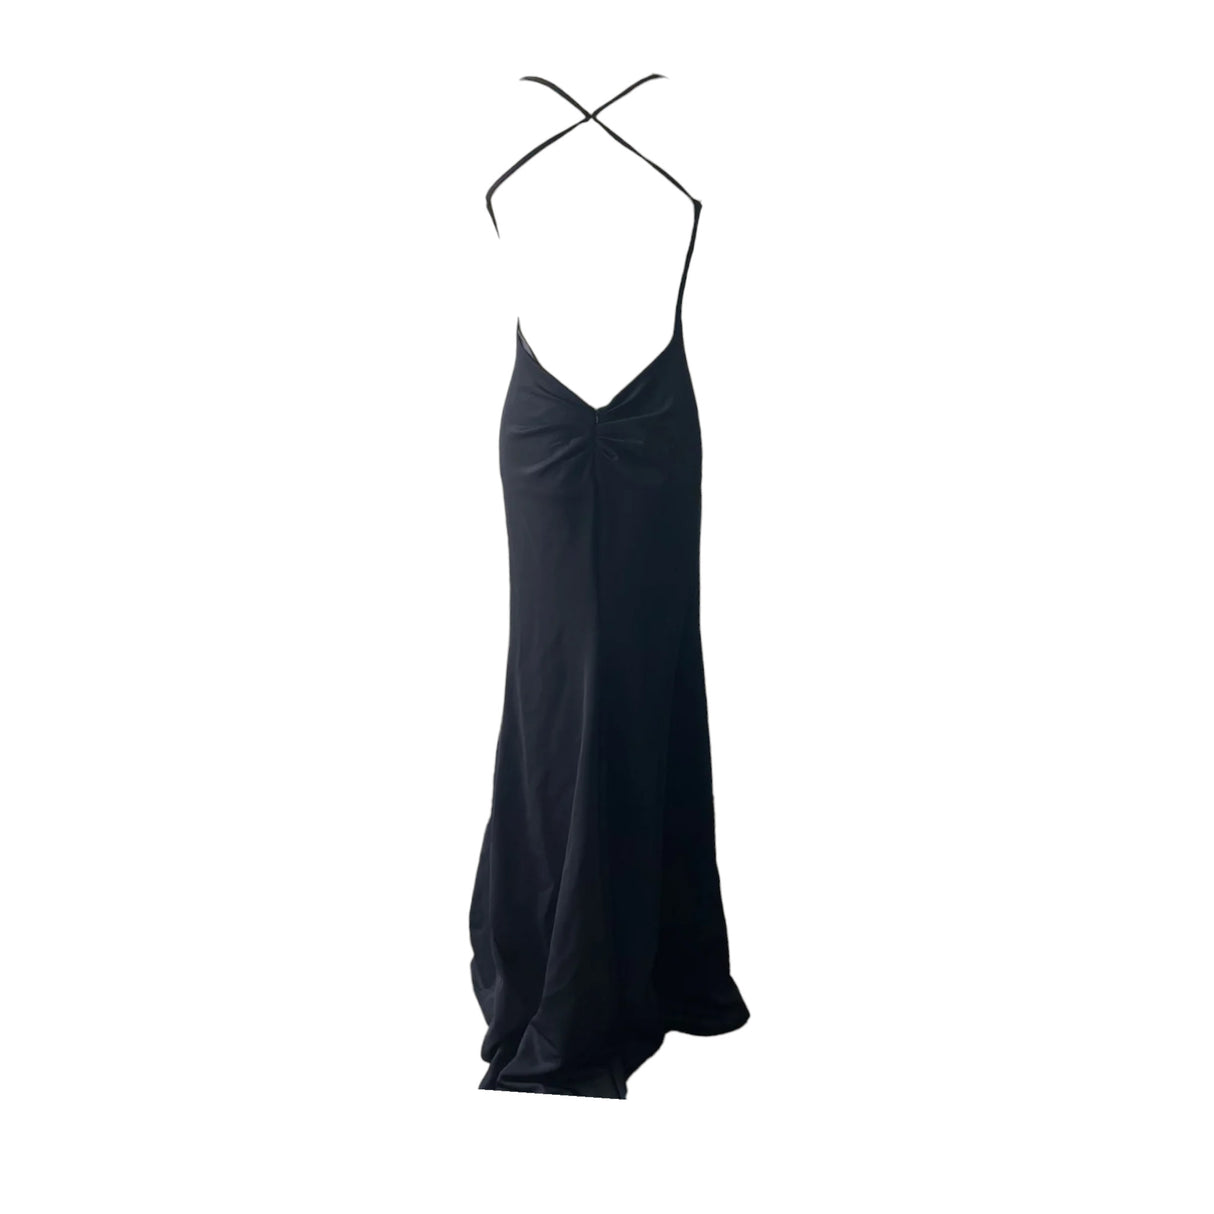 Brand-New La Femme Long Black Dress - Size S | With Tags | A Second Chance Thrift Store